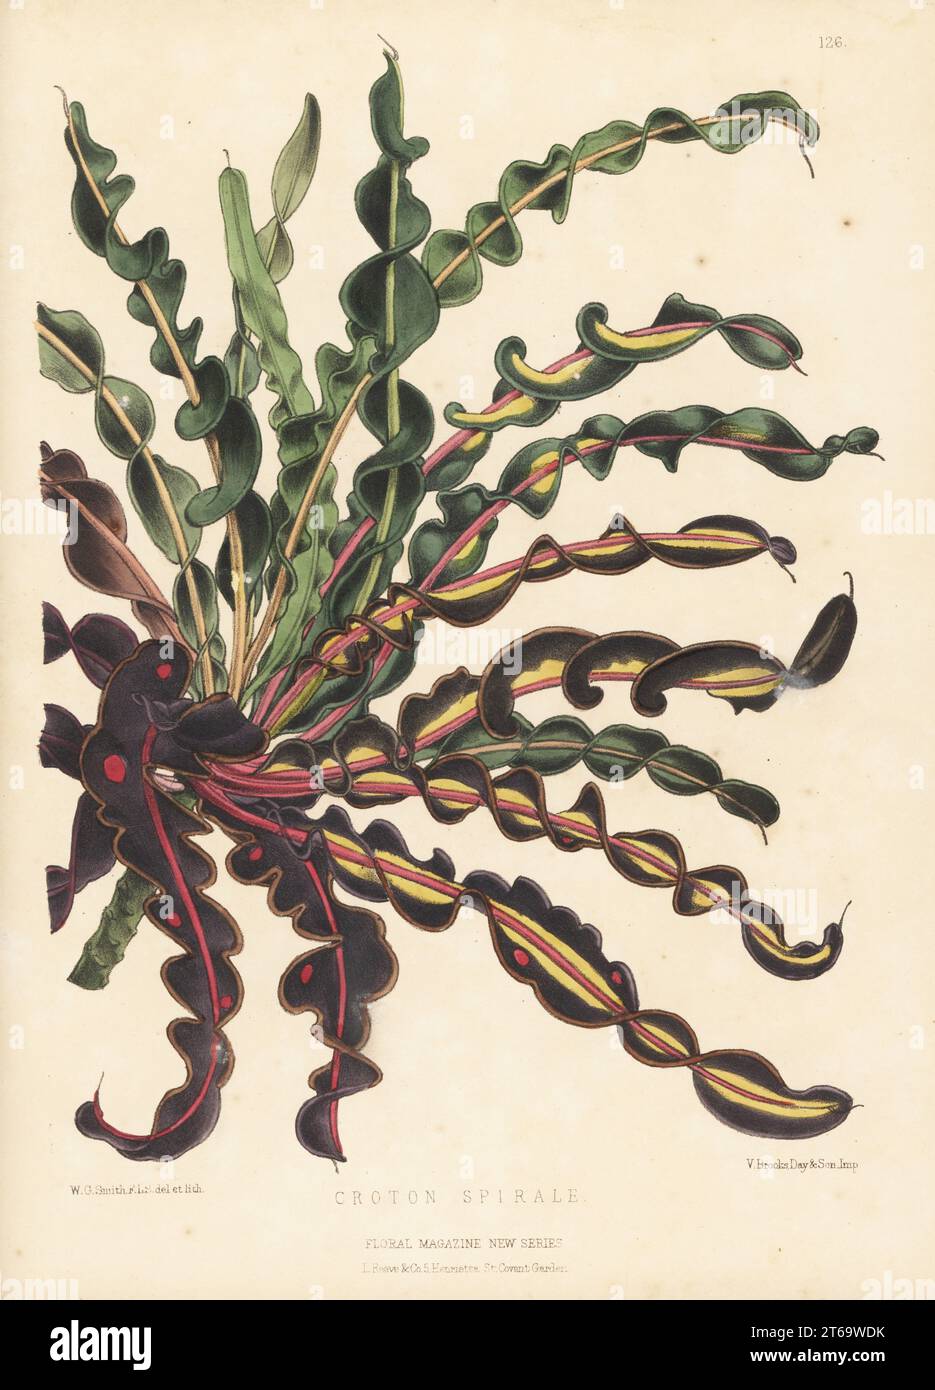 Spiral croton, Codiaeum variegatum var. spirale. As Croton spirale. An ornamental foliage plant from the South Sea Islands raised by William Bull, King's Road, Chelsea. Handcolored botanical illustration drawn and lithographed by Worthington George Smith from Henry Honywood Dombrain's Floral Magazine, New Series, Volume 3, L. Reeve, London, 1874. Lithograph printed by Vincent Brooks, Day & Son. Stock Photo